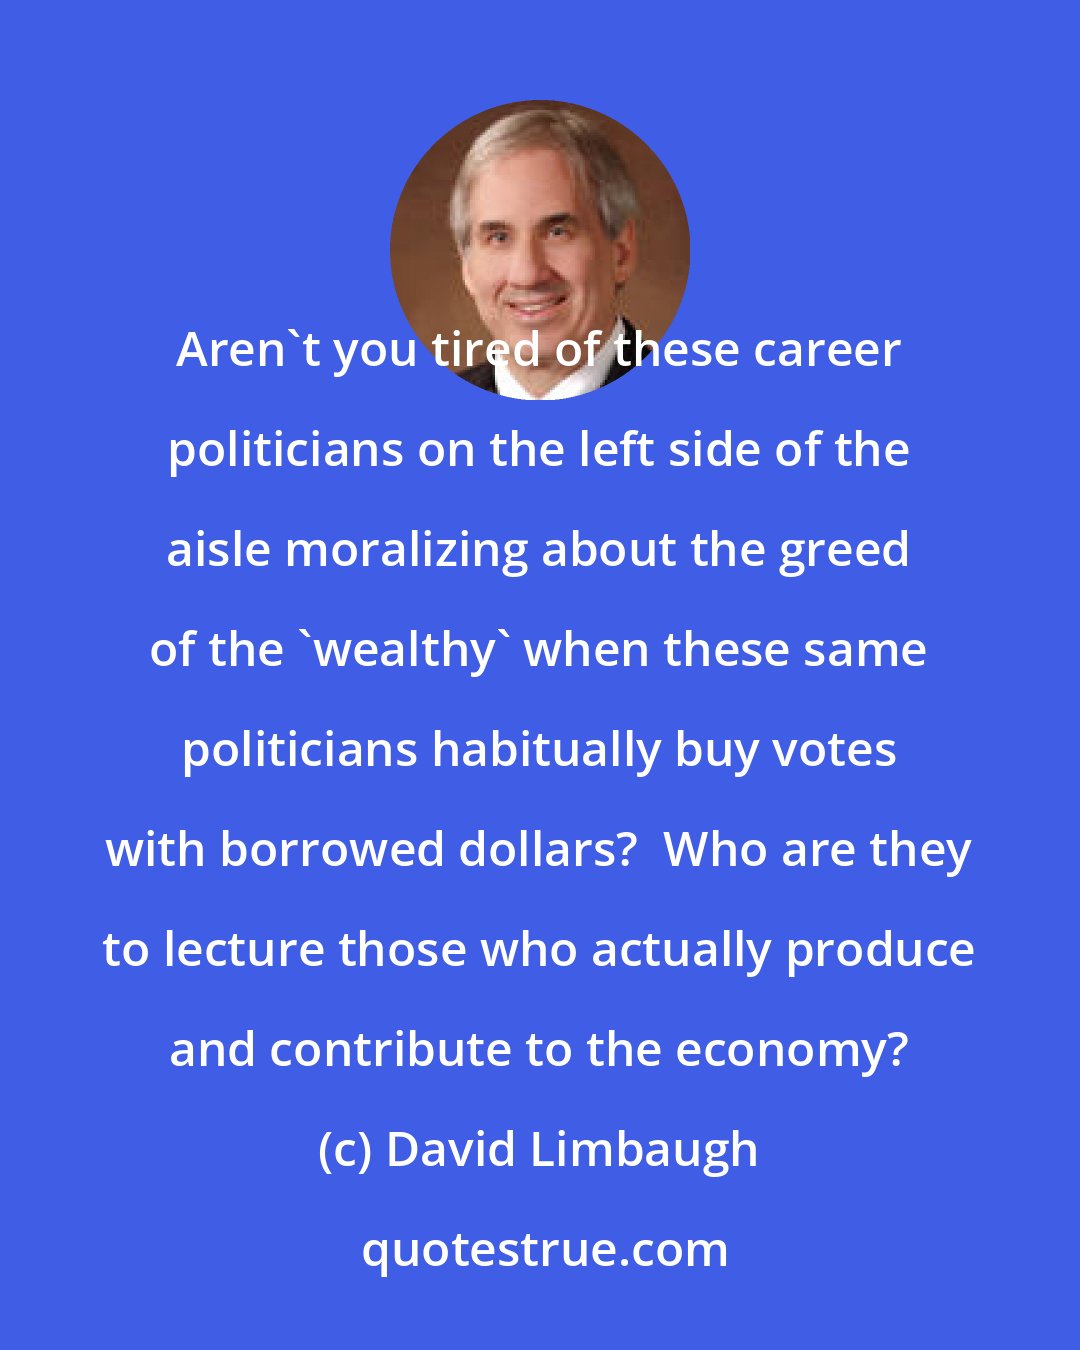 David Limbaugh: Aren't you tired of these career politicians on the left side of the aisle moralizing about the greed of the 'wealthy' when these same politicians habitually buy votes with borrowed dollars?  Who are they to lecture those who actually produce and contribute to the economy?